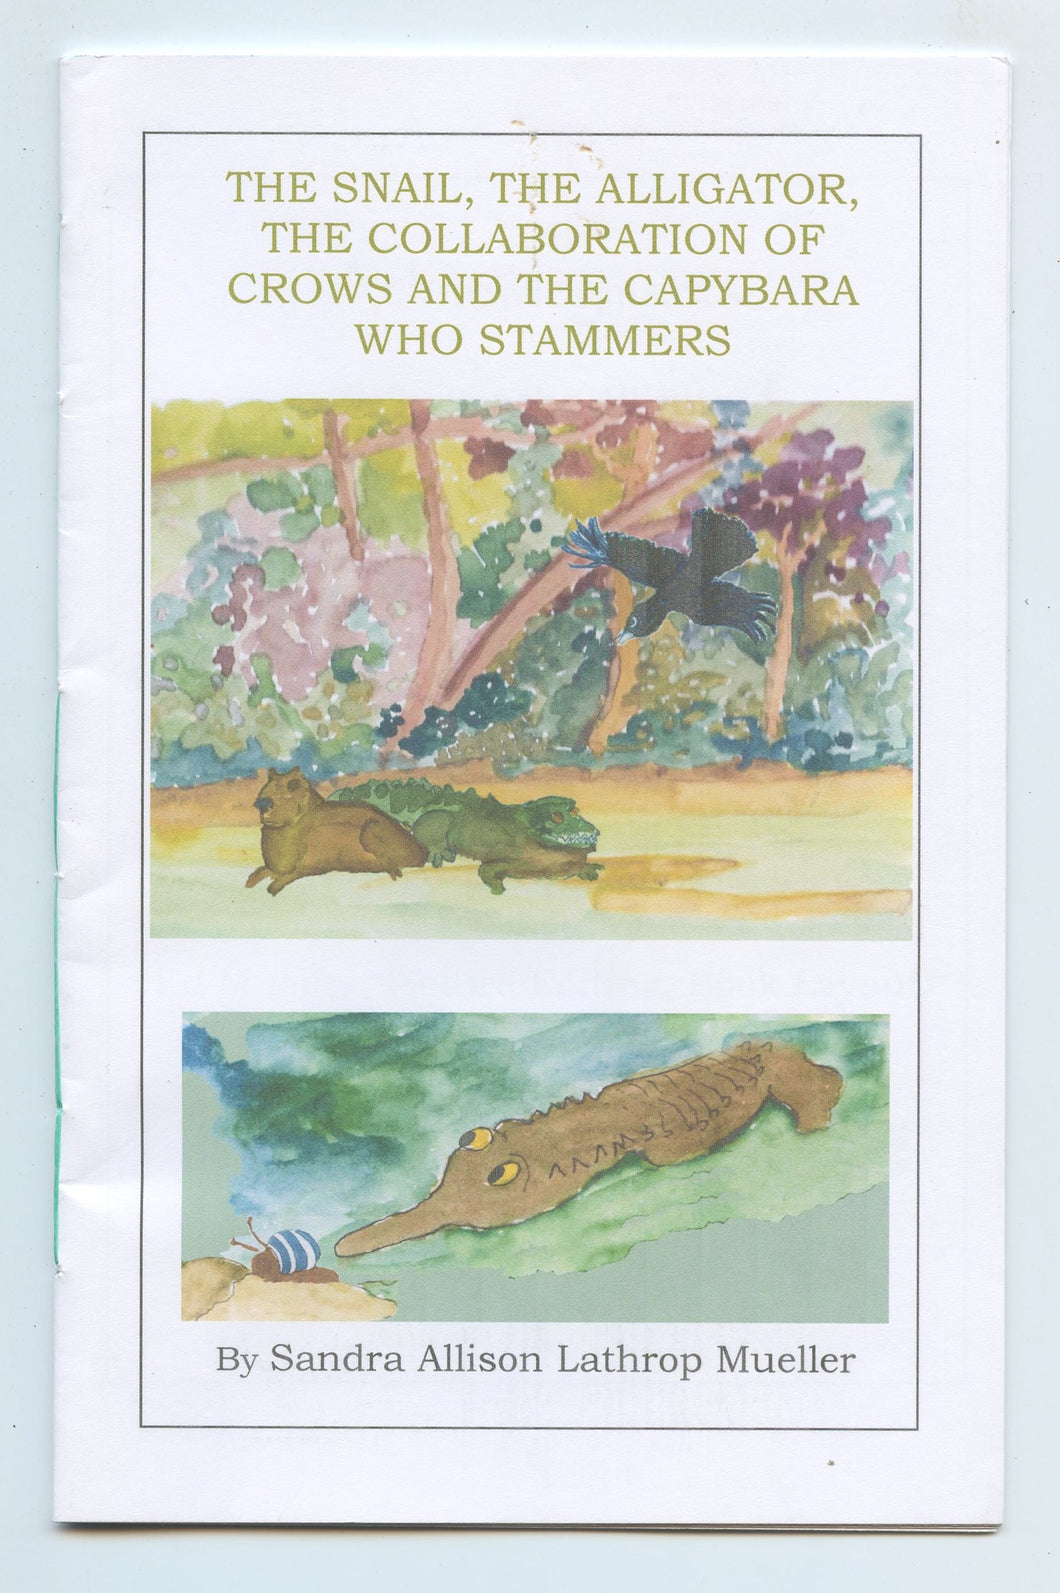 The Snail, The Alligator, The Collaboration of crows and the Capybara Who Stammers